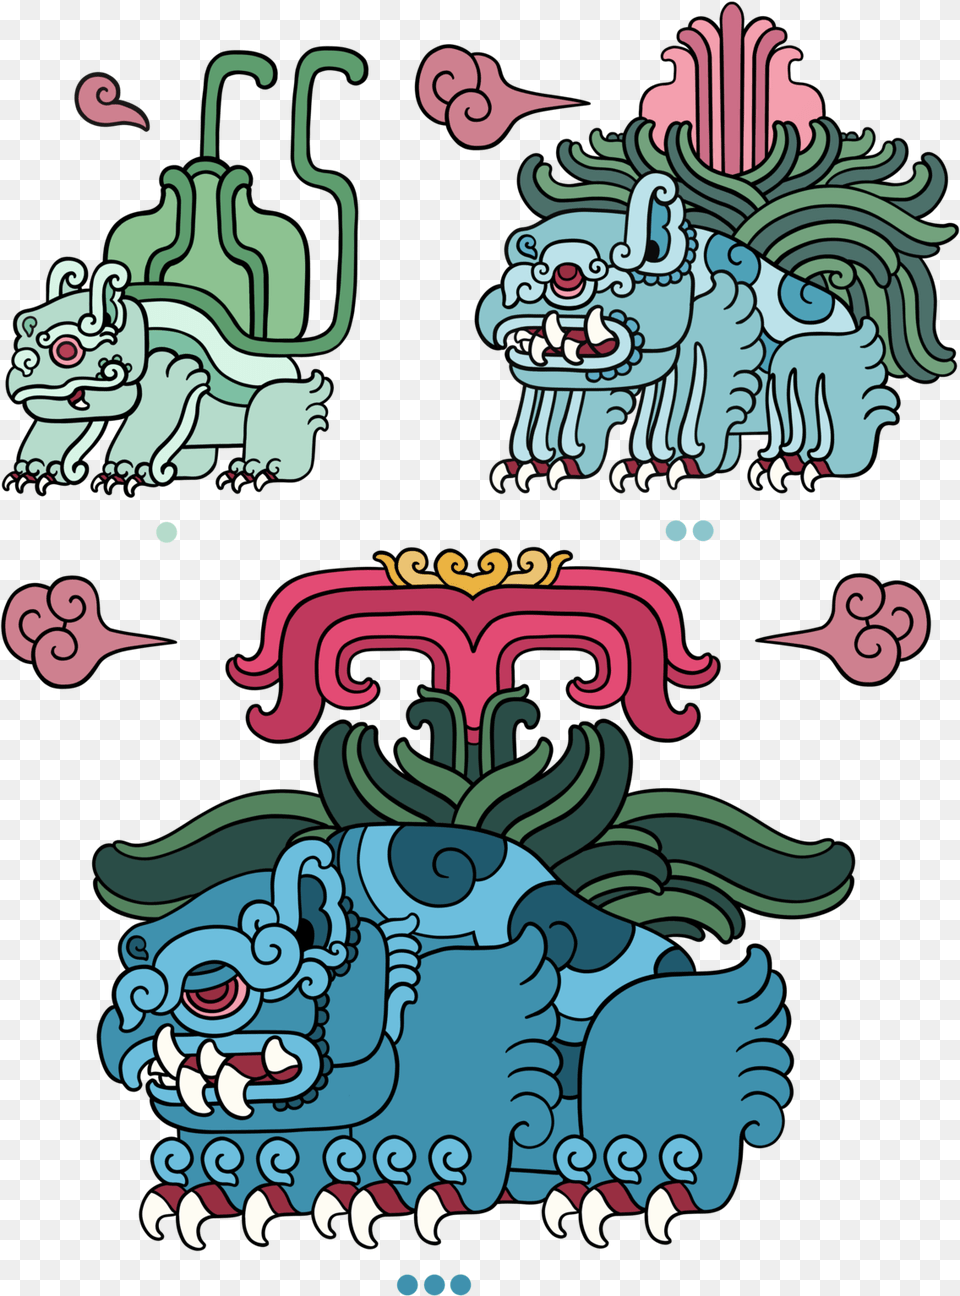 Digital Drawing Of The Pokemon Bulbasaur Ivysaur Pokemon Bulbasaur Ivysaur Venusaur, Art, Graphics, Pattern, Book Png